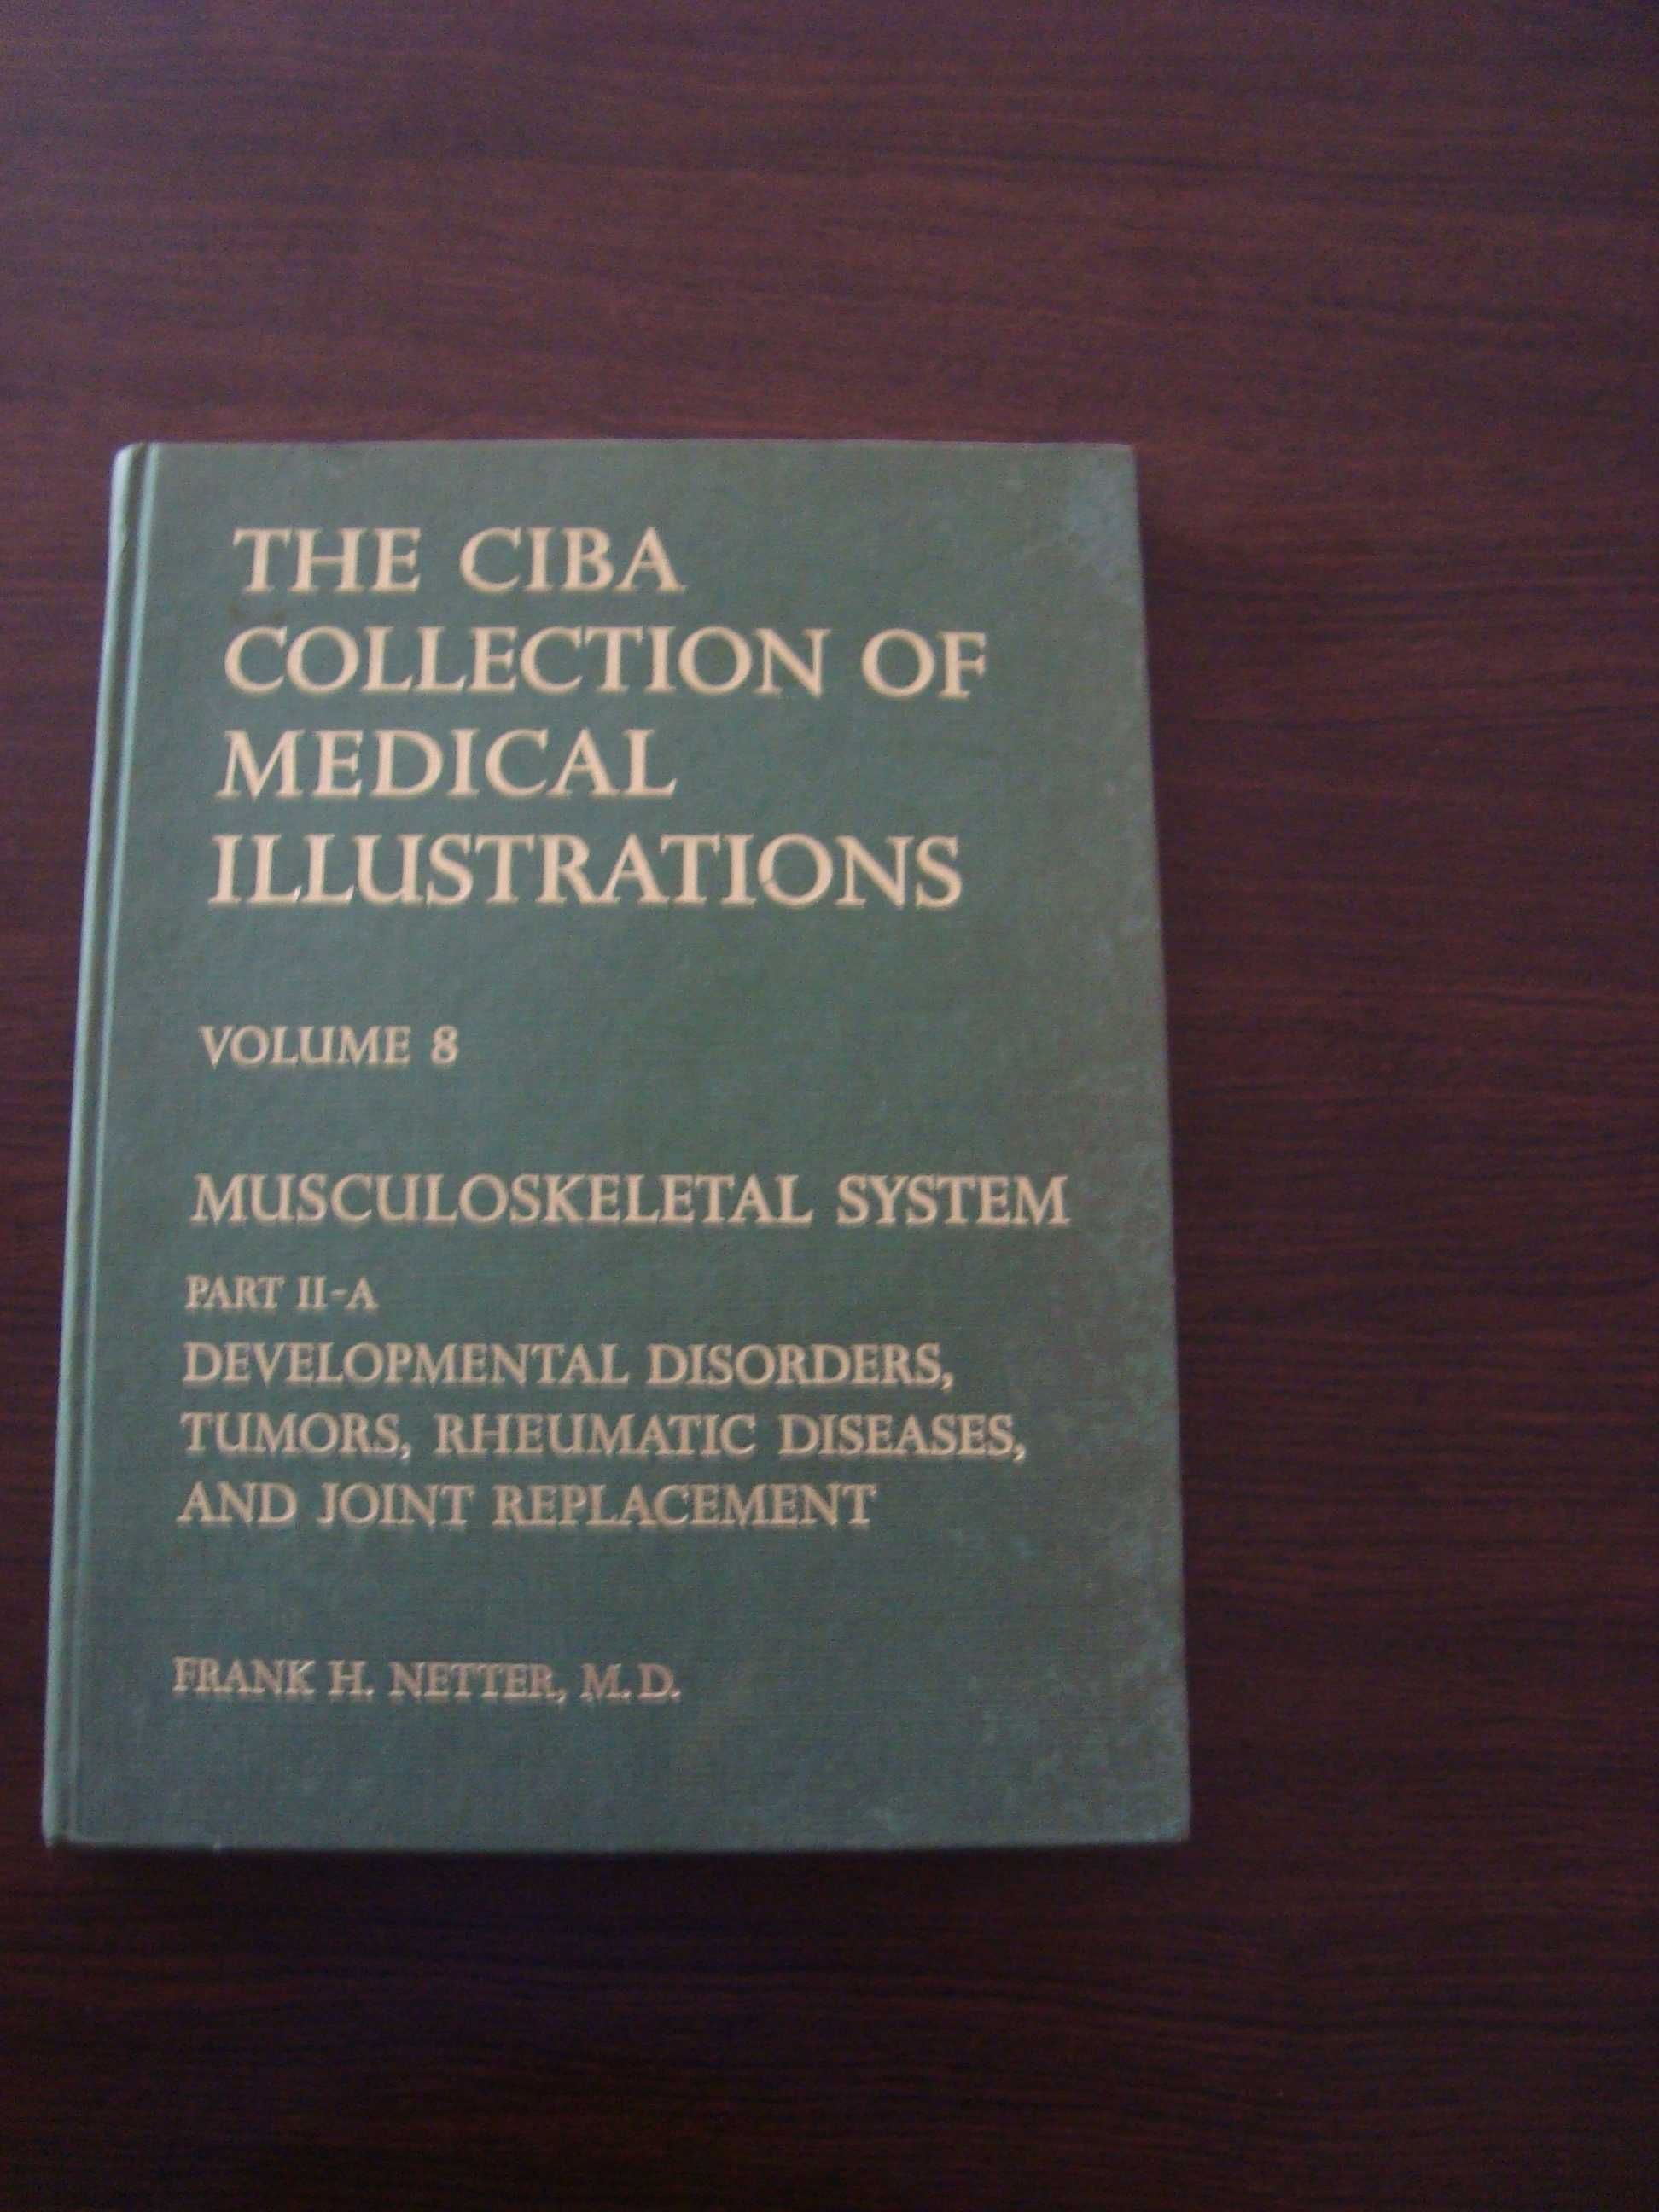 livro “The Ciba Collection of Medical Illustrations”